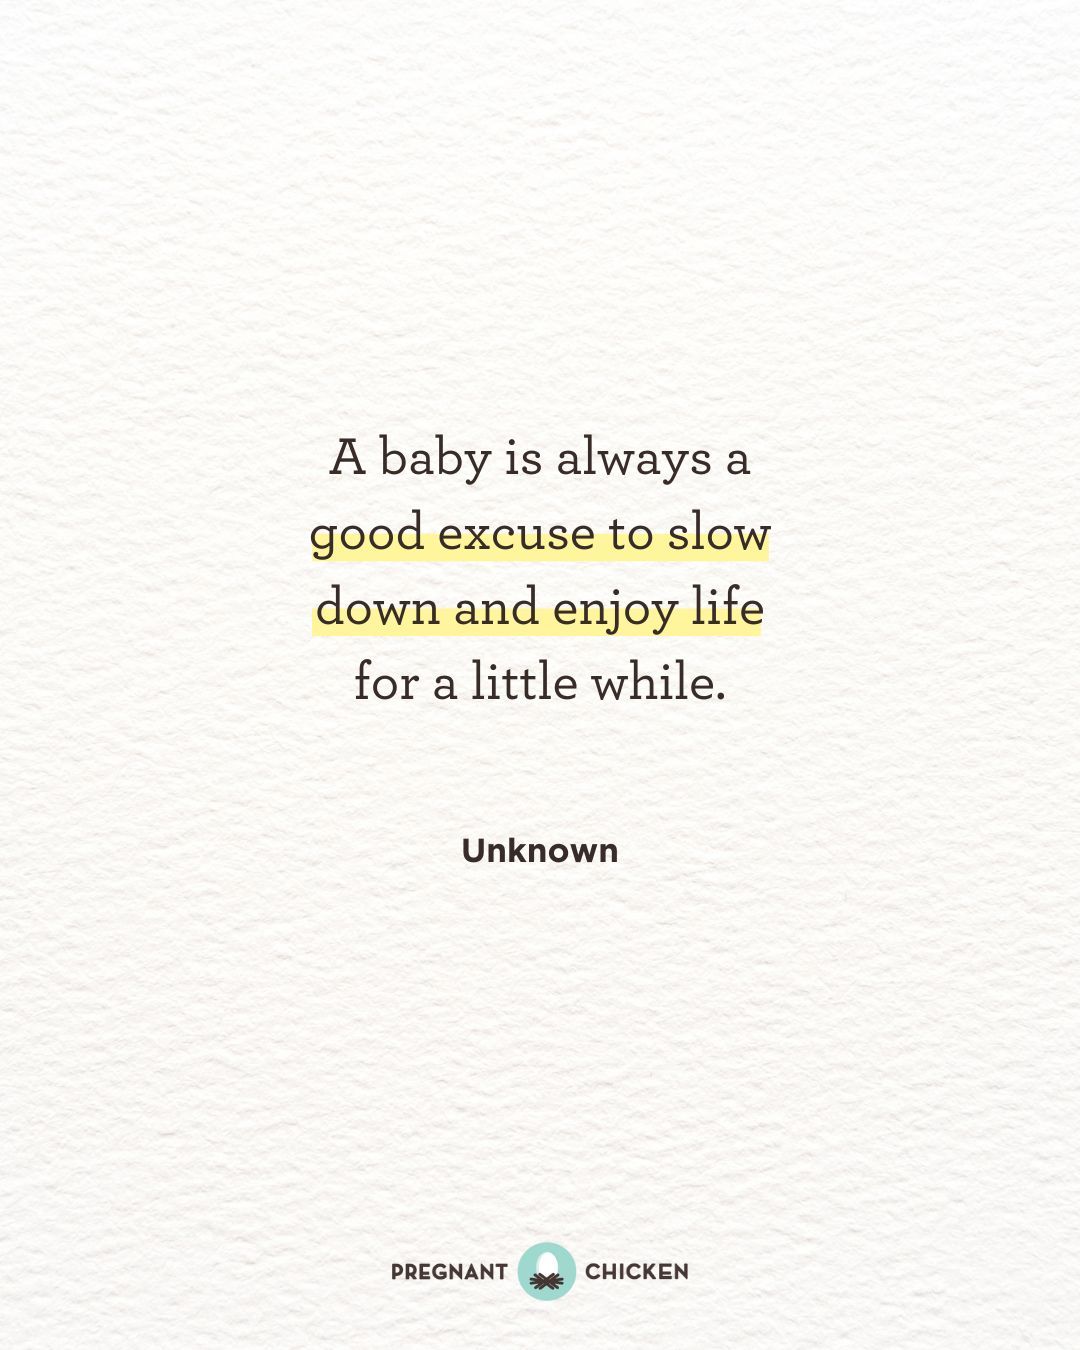 A baby is always a good excuse to slow down and enjoy life for a little while.